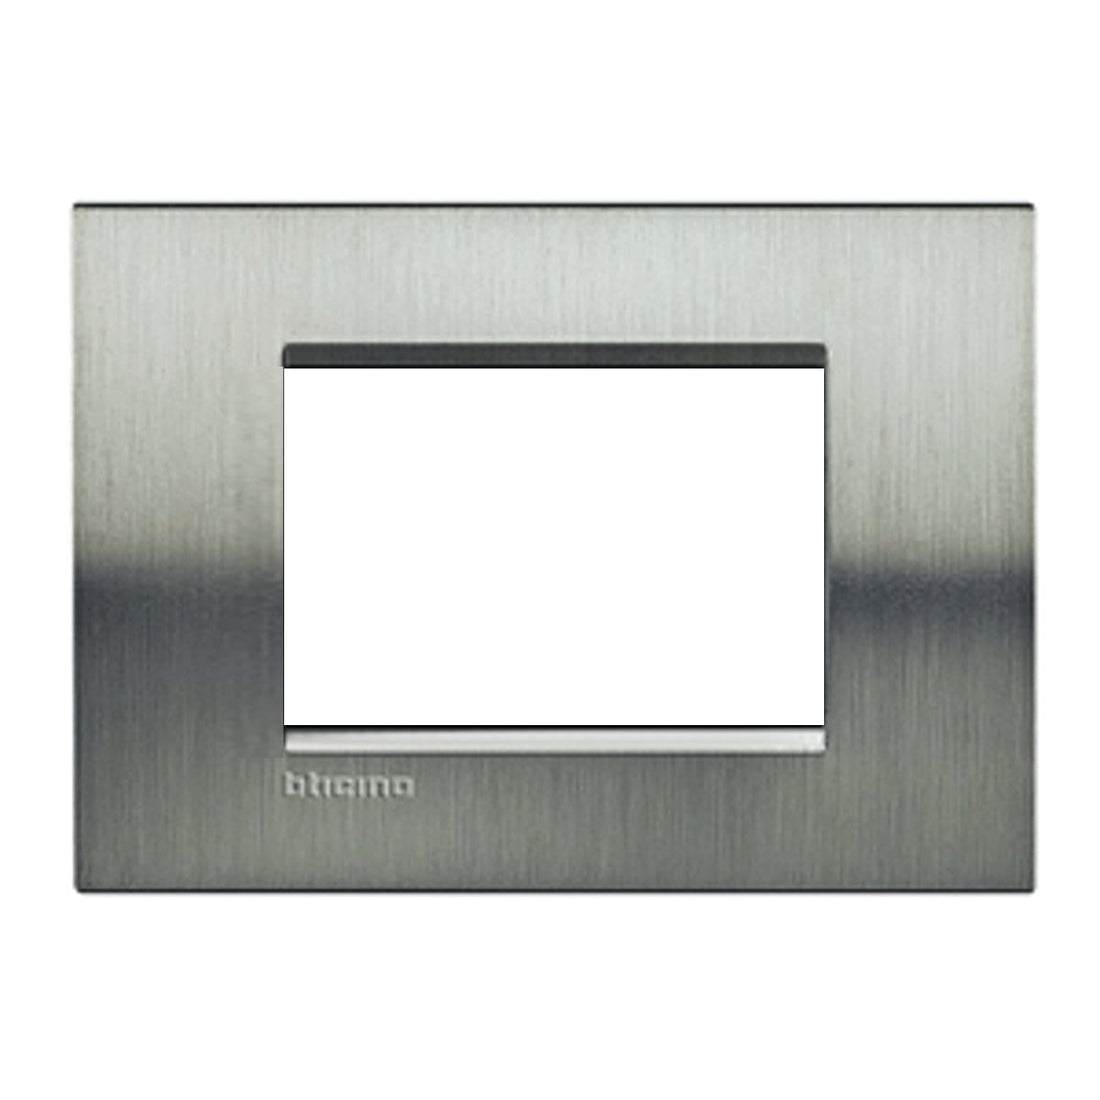 LIVING LIGHT 3 PLACE PLATE BRUSHED STEEL